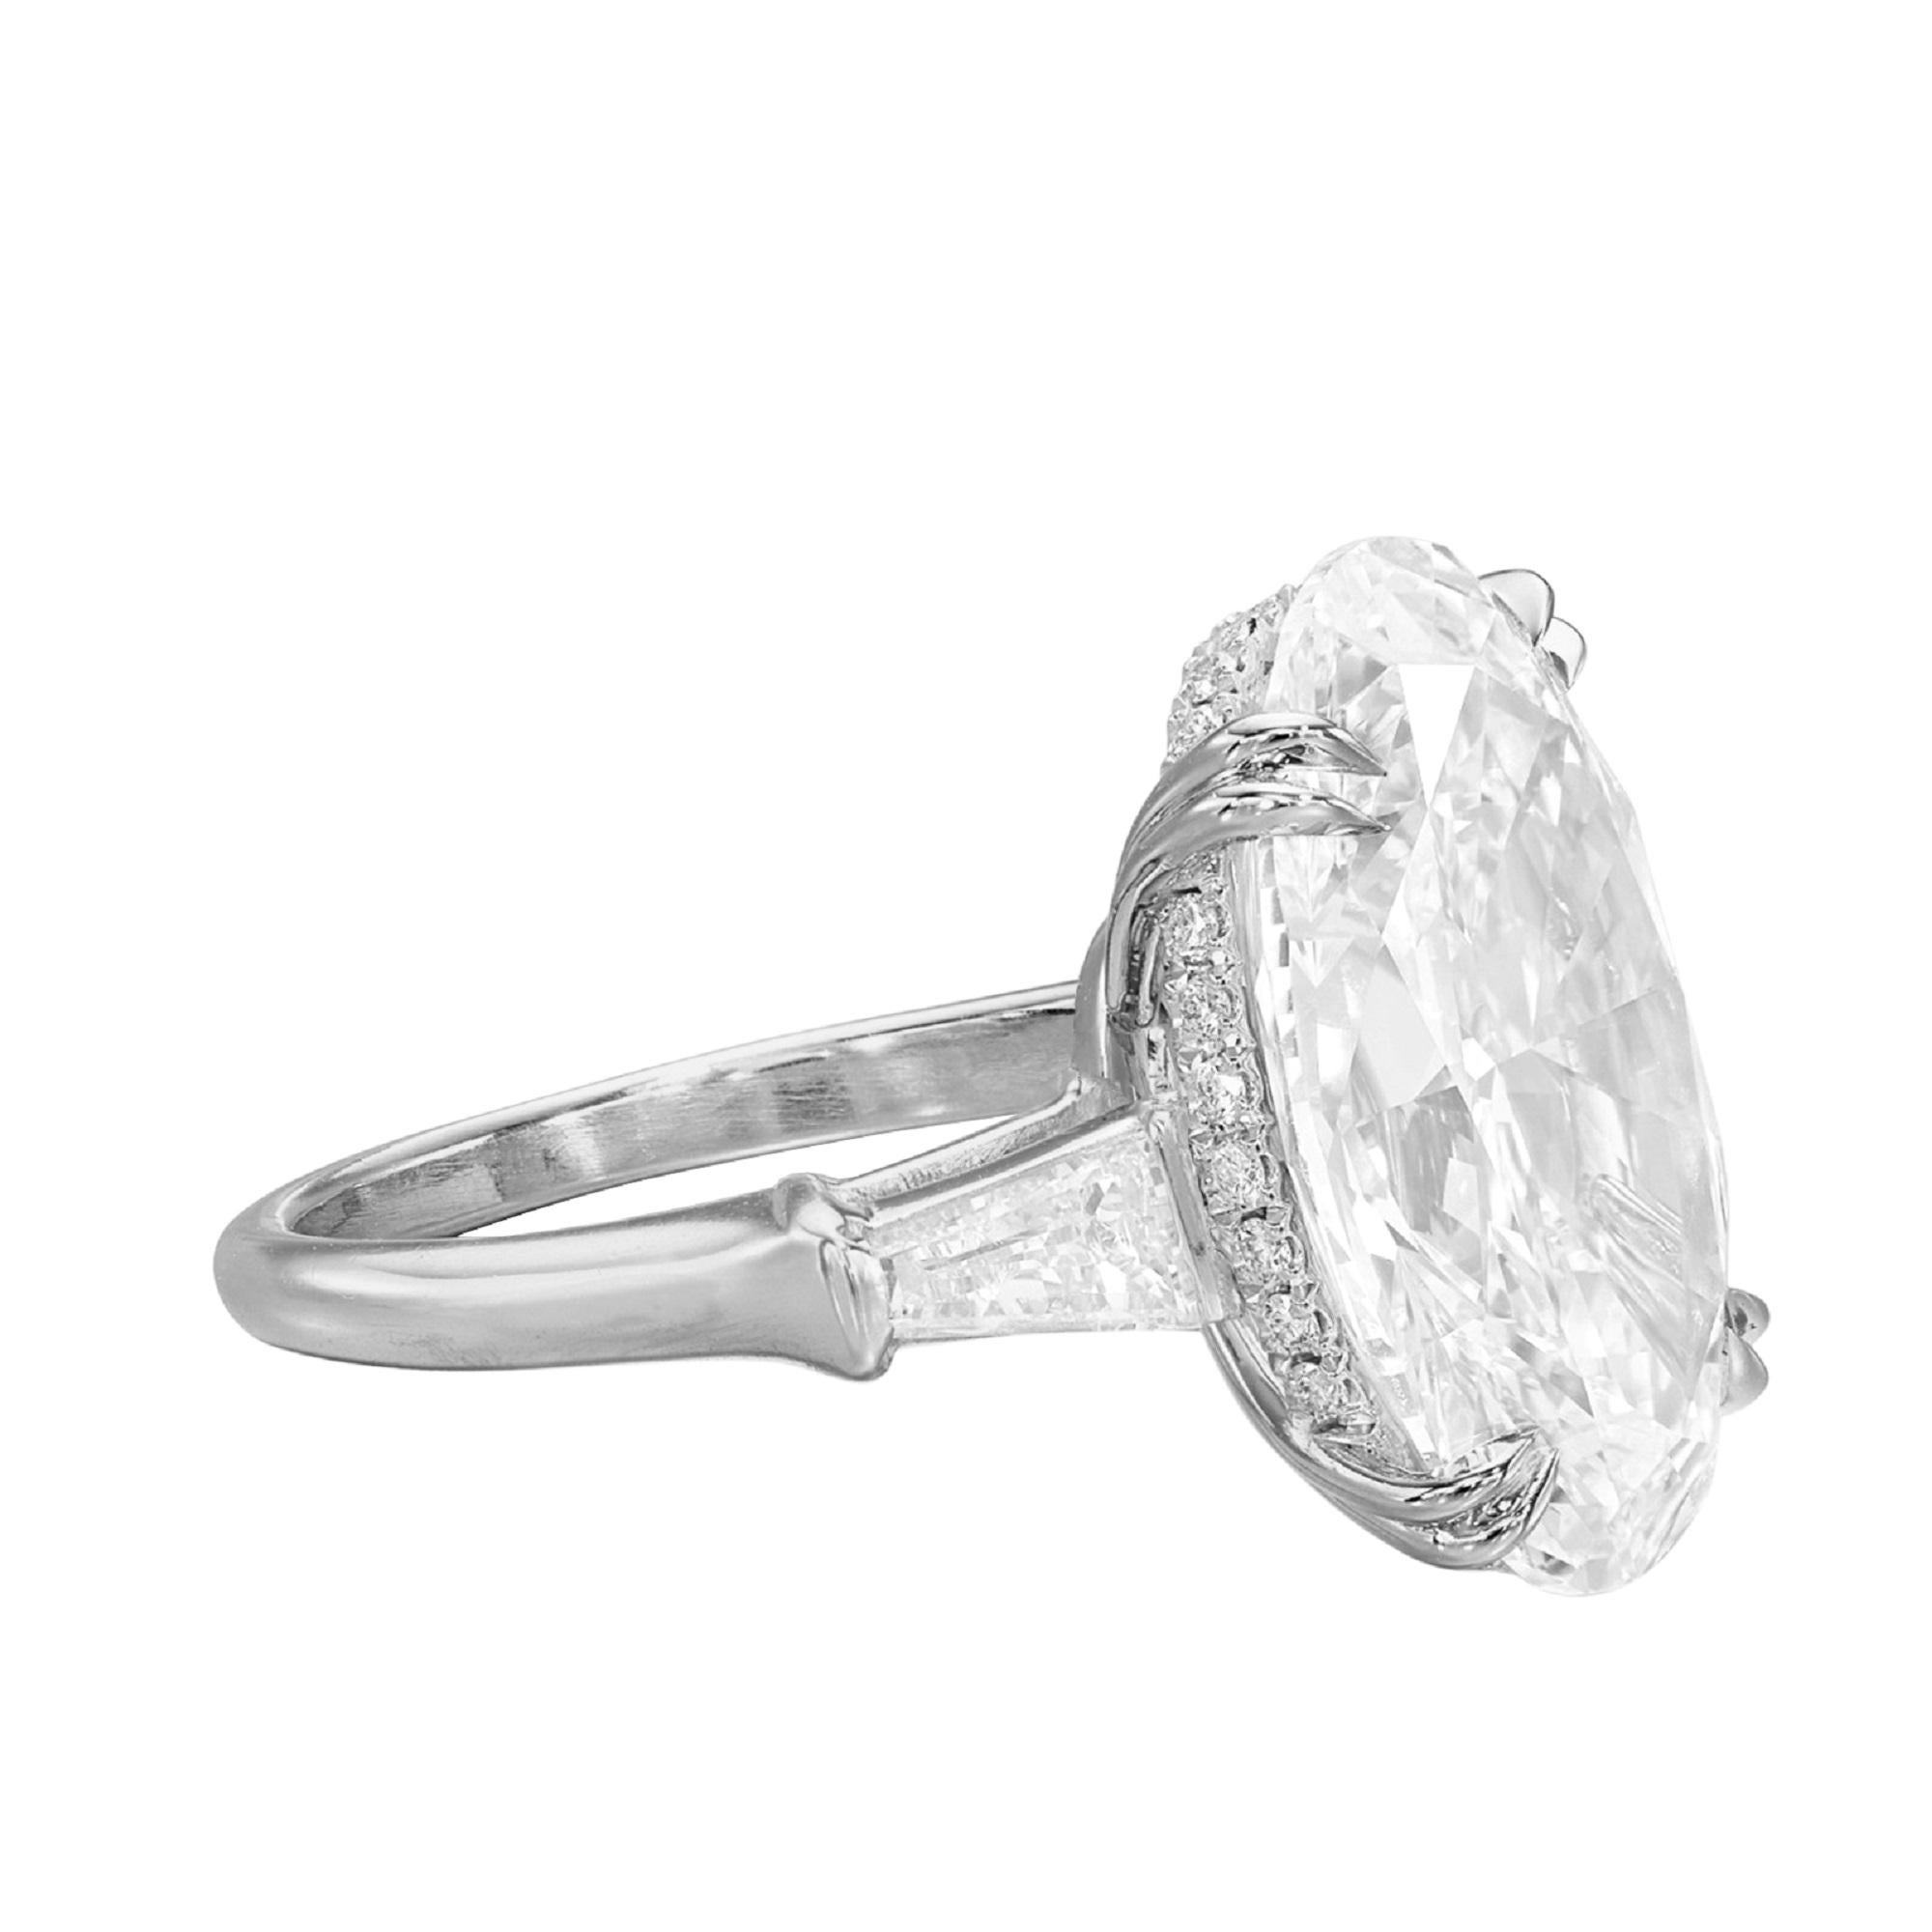 This engagement ring is a true epitome of elegance and brilliance. It is centered around a breathtaking 4-carat oval diamond, which is not only GIA certified but also boasts a G color rating and a VS1 clarity, ensuring its exceptional quality and